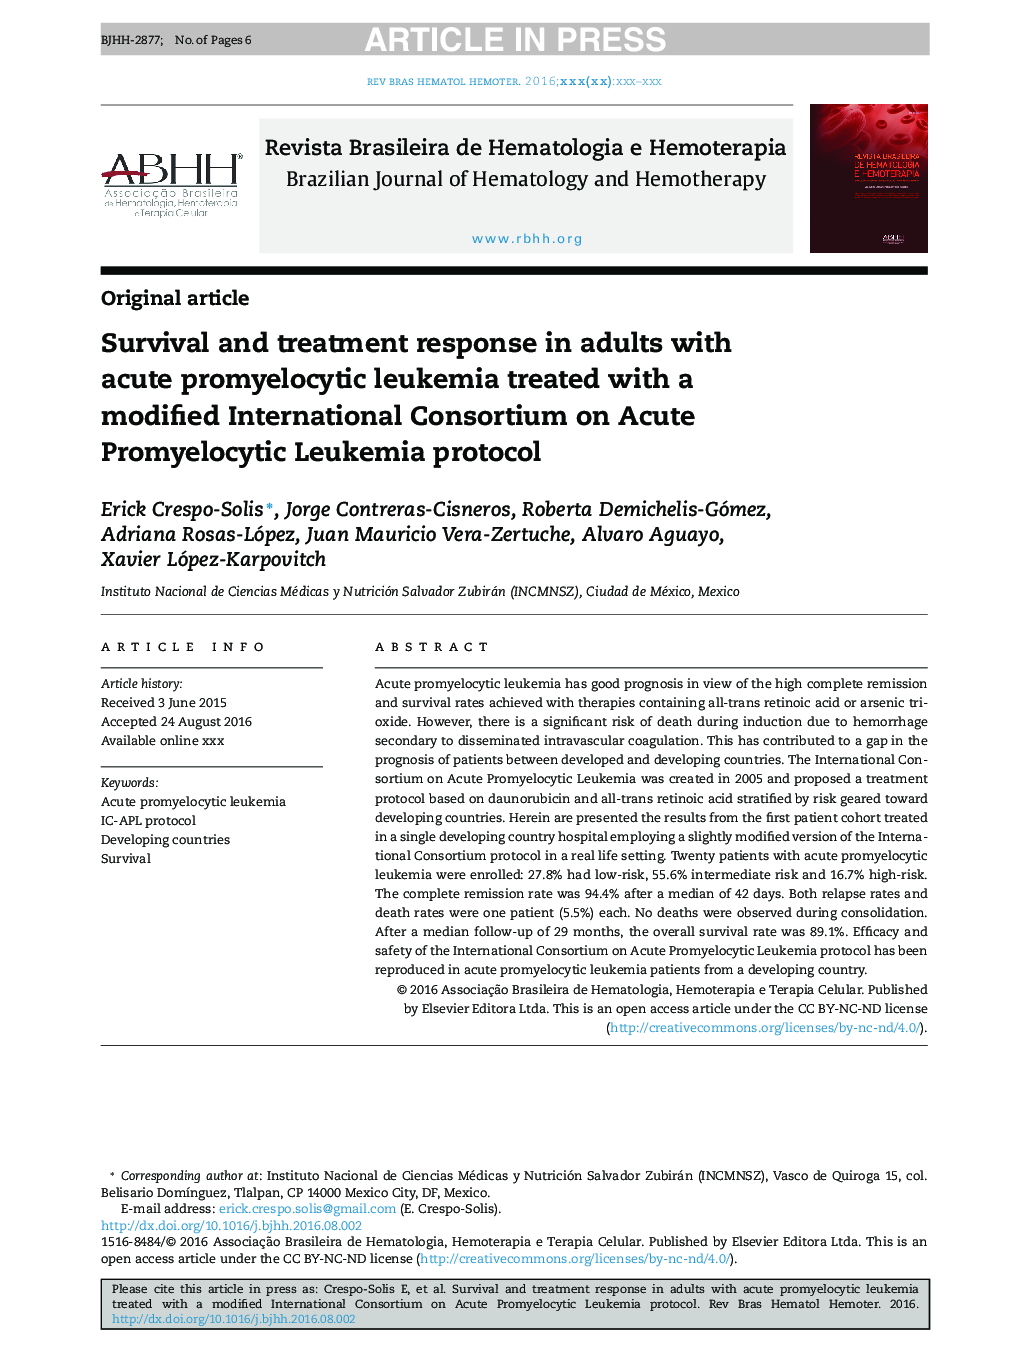 Survival and treatment response in adults with acute promyelocytic leukemia treated with a modified International Consortium on Acute Promyelocytic Leukemia protocol